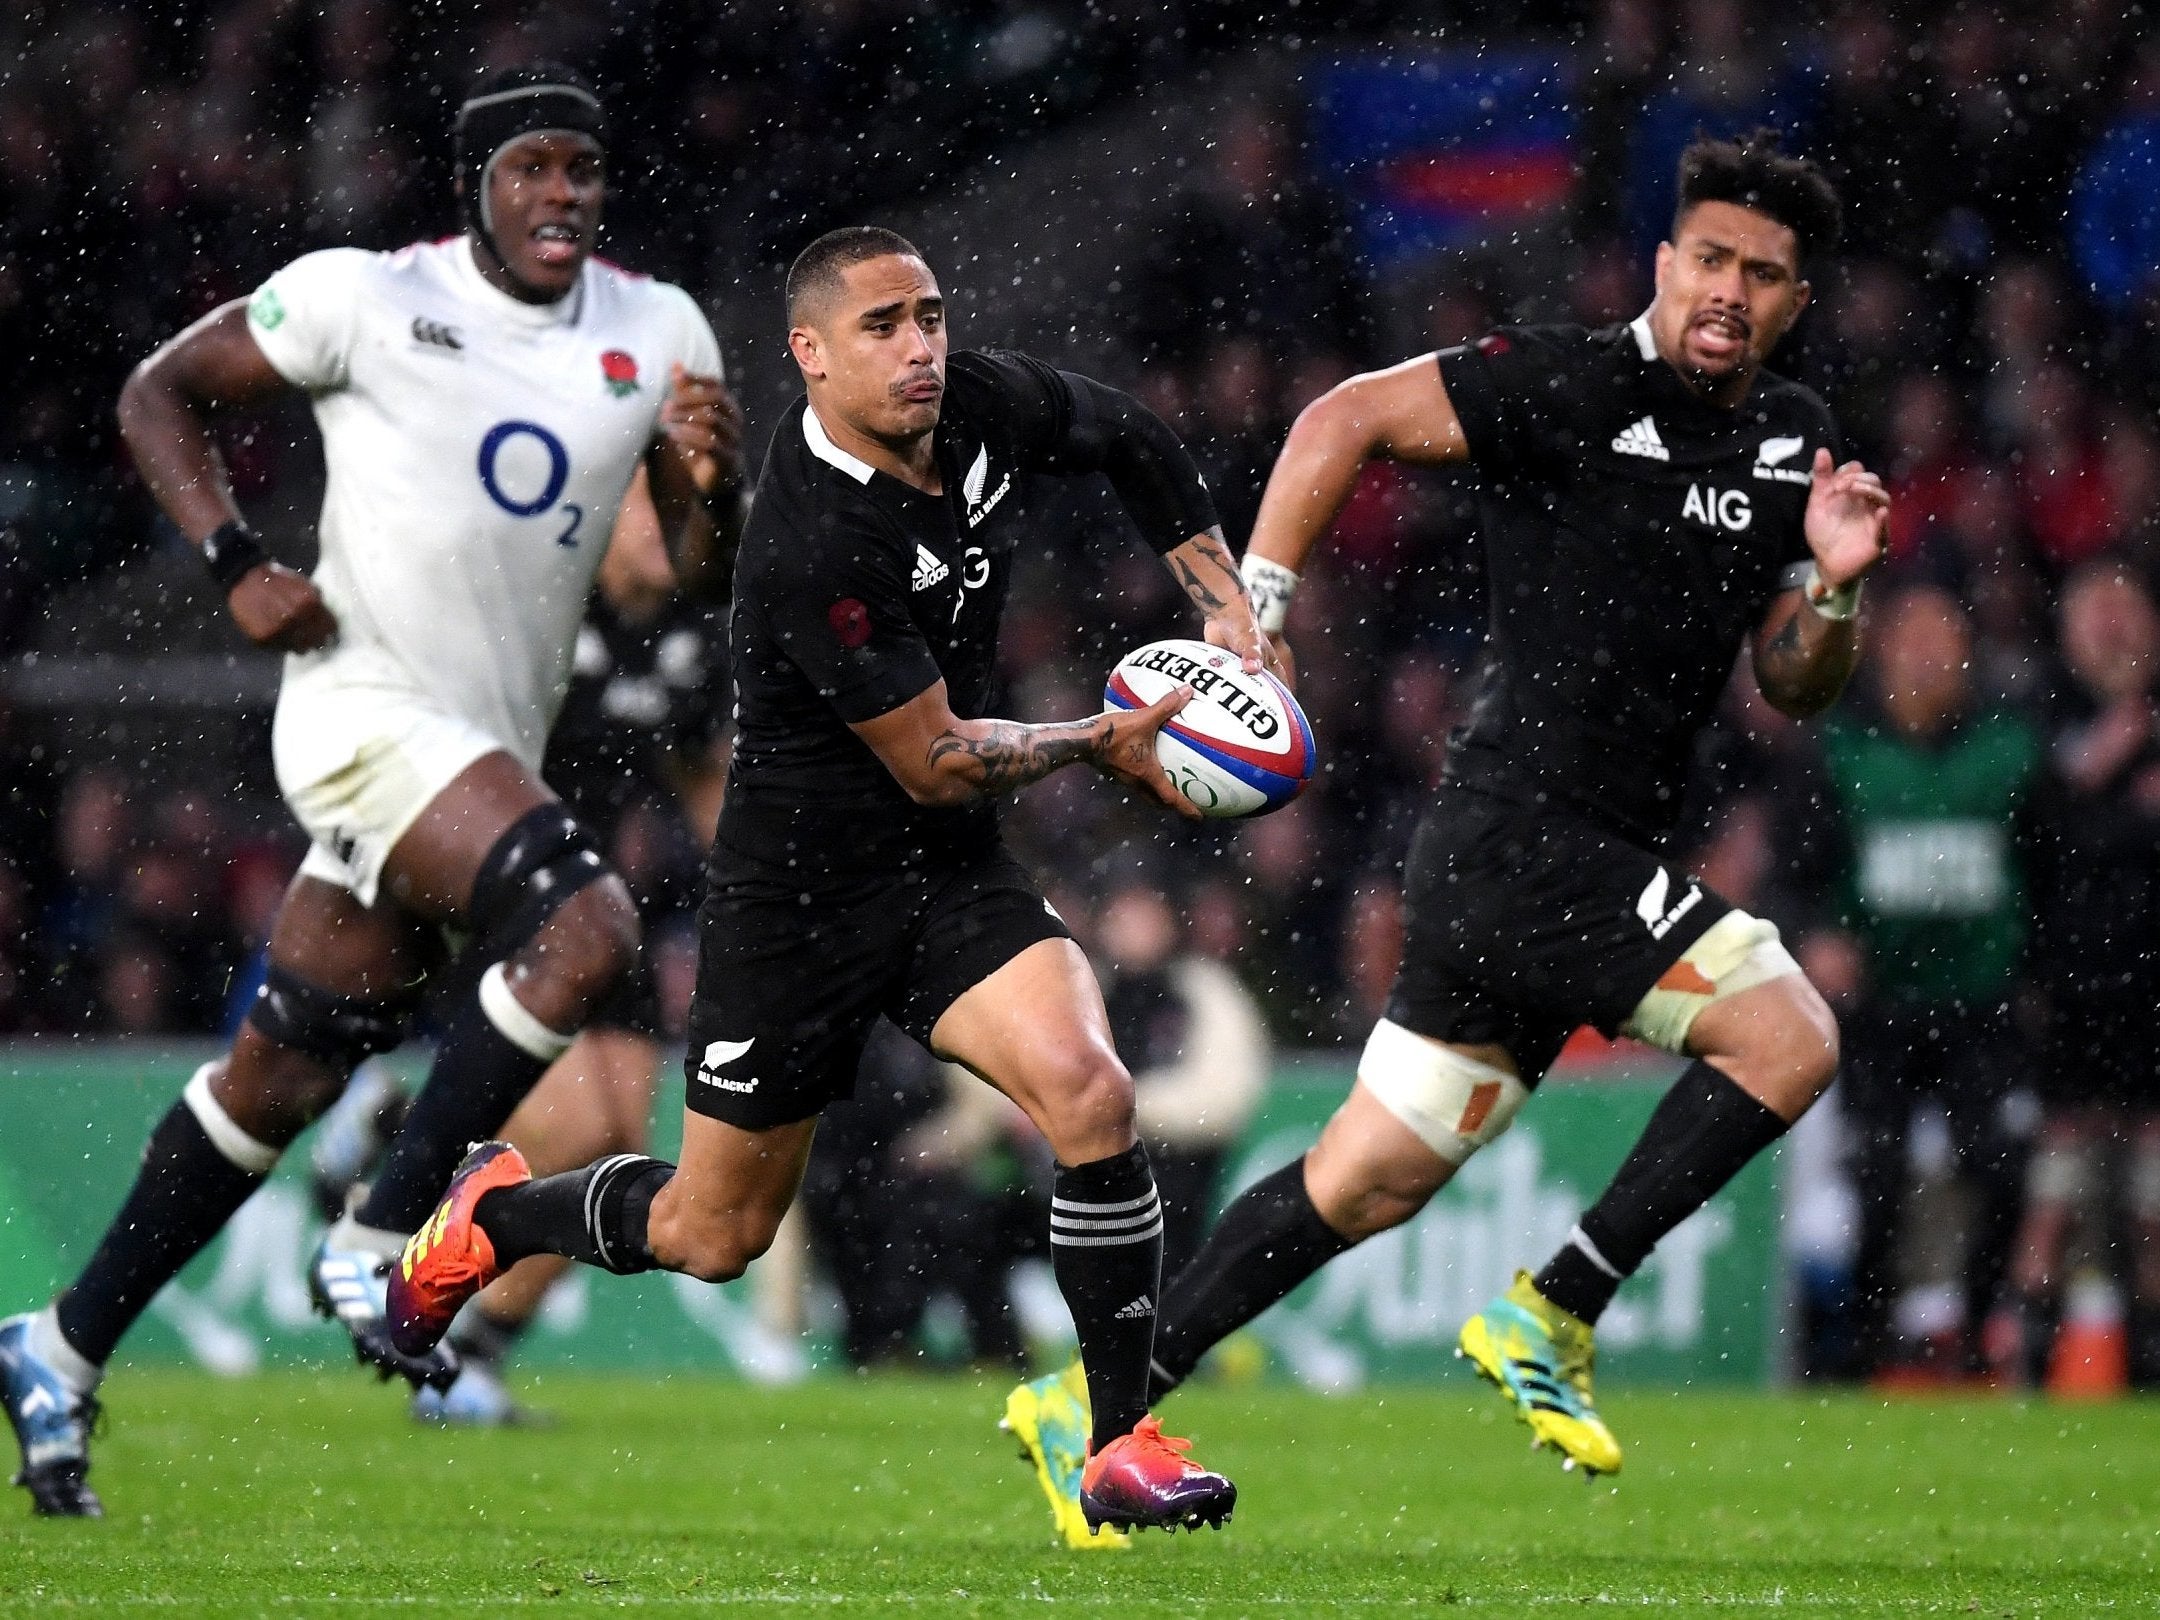 Aaron Smith gets on the ball for the All Blacks